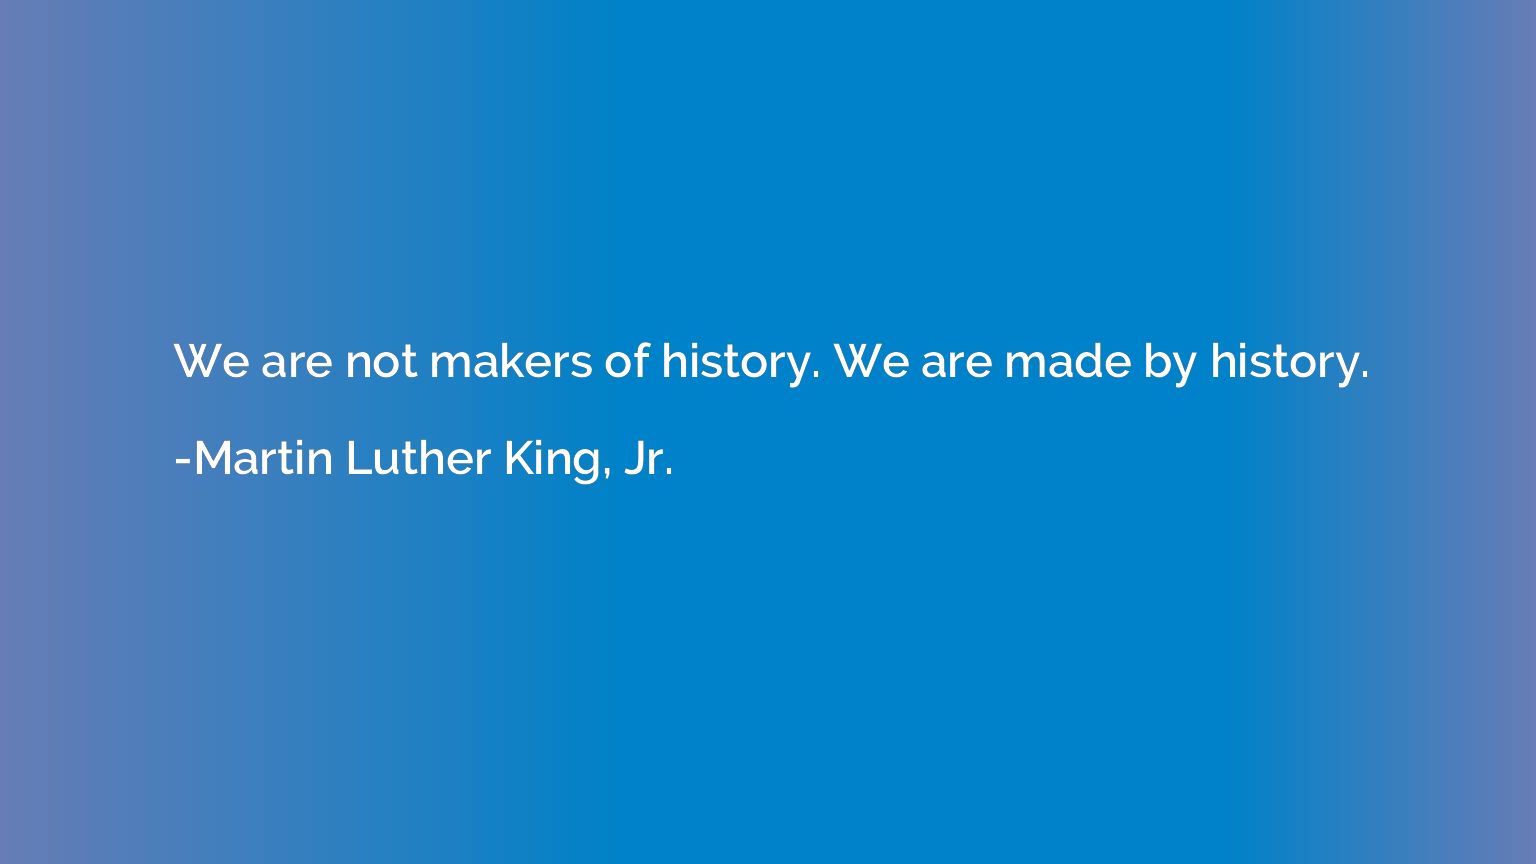 We are not makers of history. We are made by history.